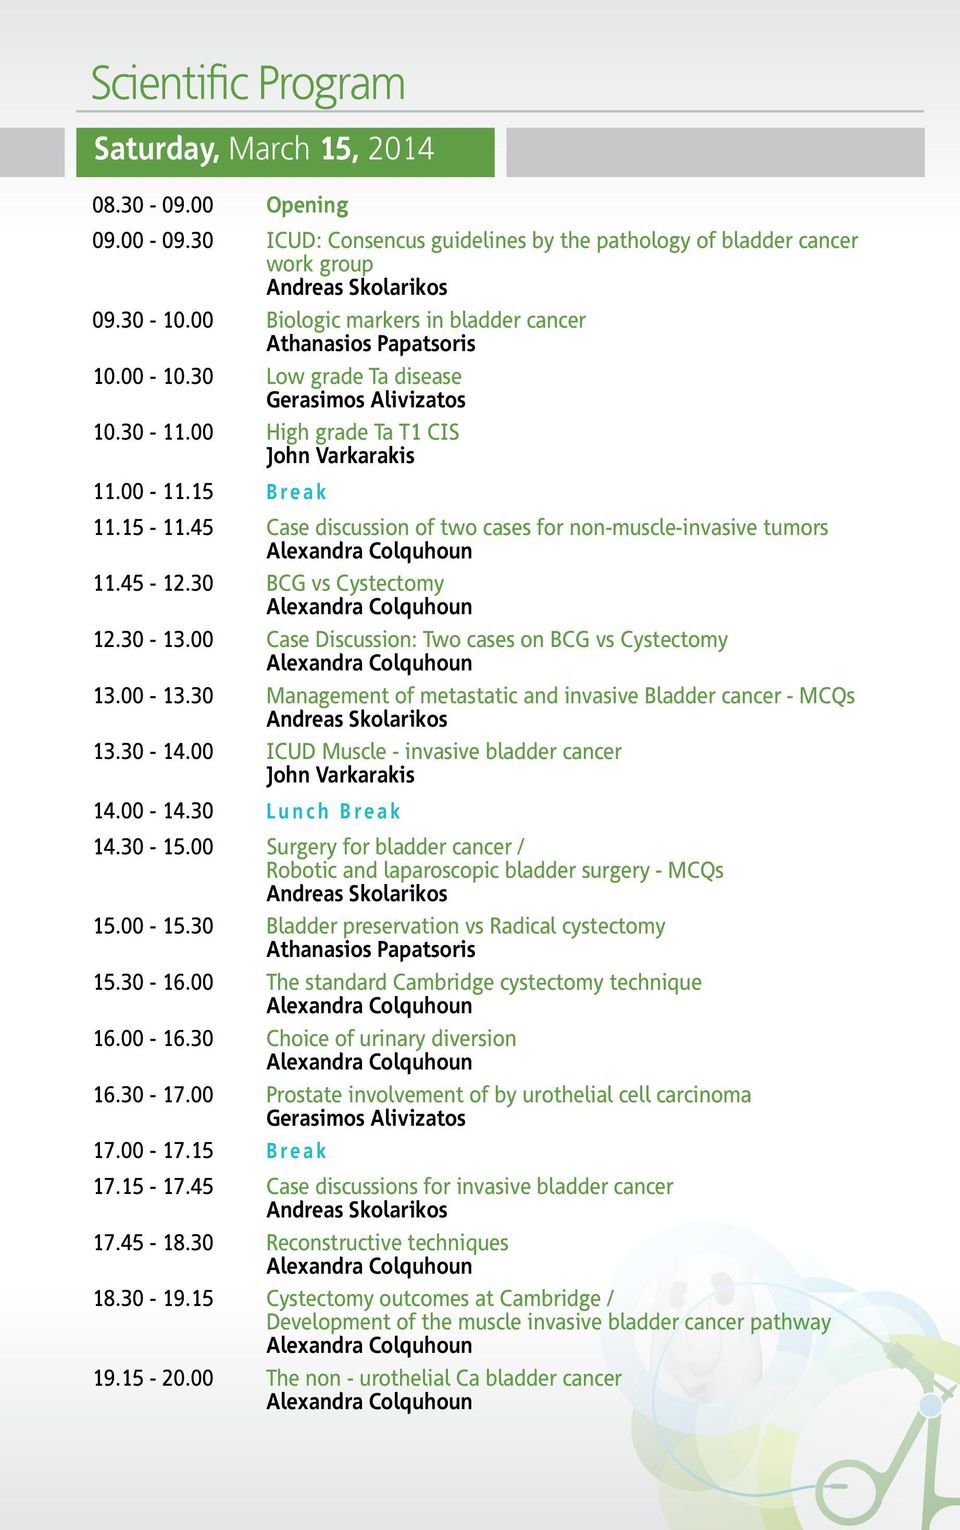 45 Case discussion of two cases for non-muscle-invasive tumors 11.45-12.30 BCG vs Cystectomy 12.30-13.00 Case Discussion: Two cases on BCG vs Cystectomy 13.00-13.